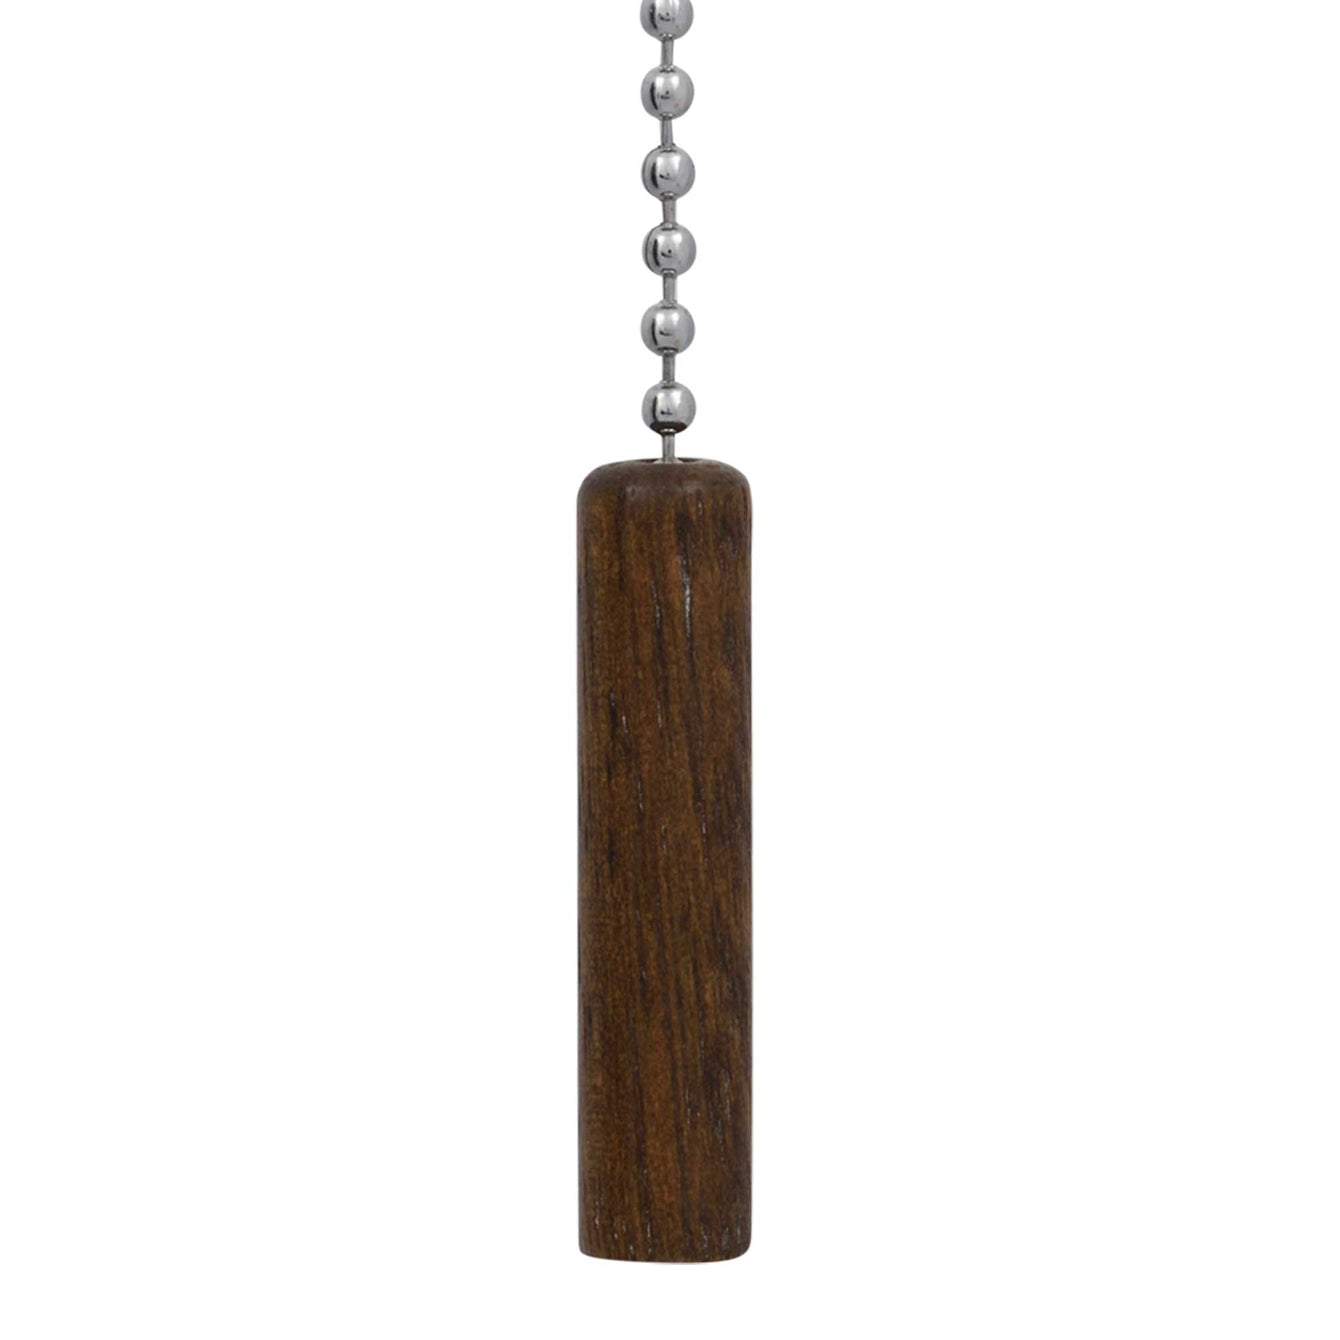 ElekTek Light Pull Chain Small Oak Cylinder With 80cm Matching Chain - Buy It Better Default Title